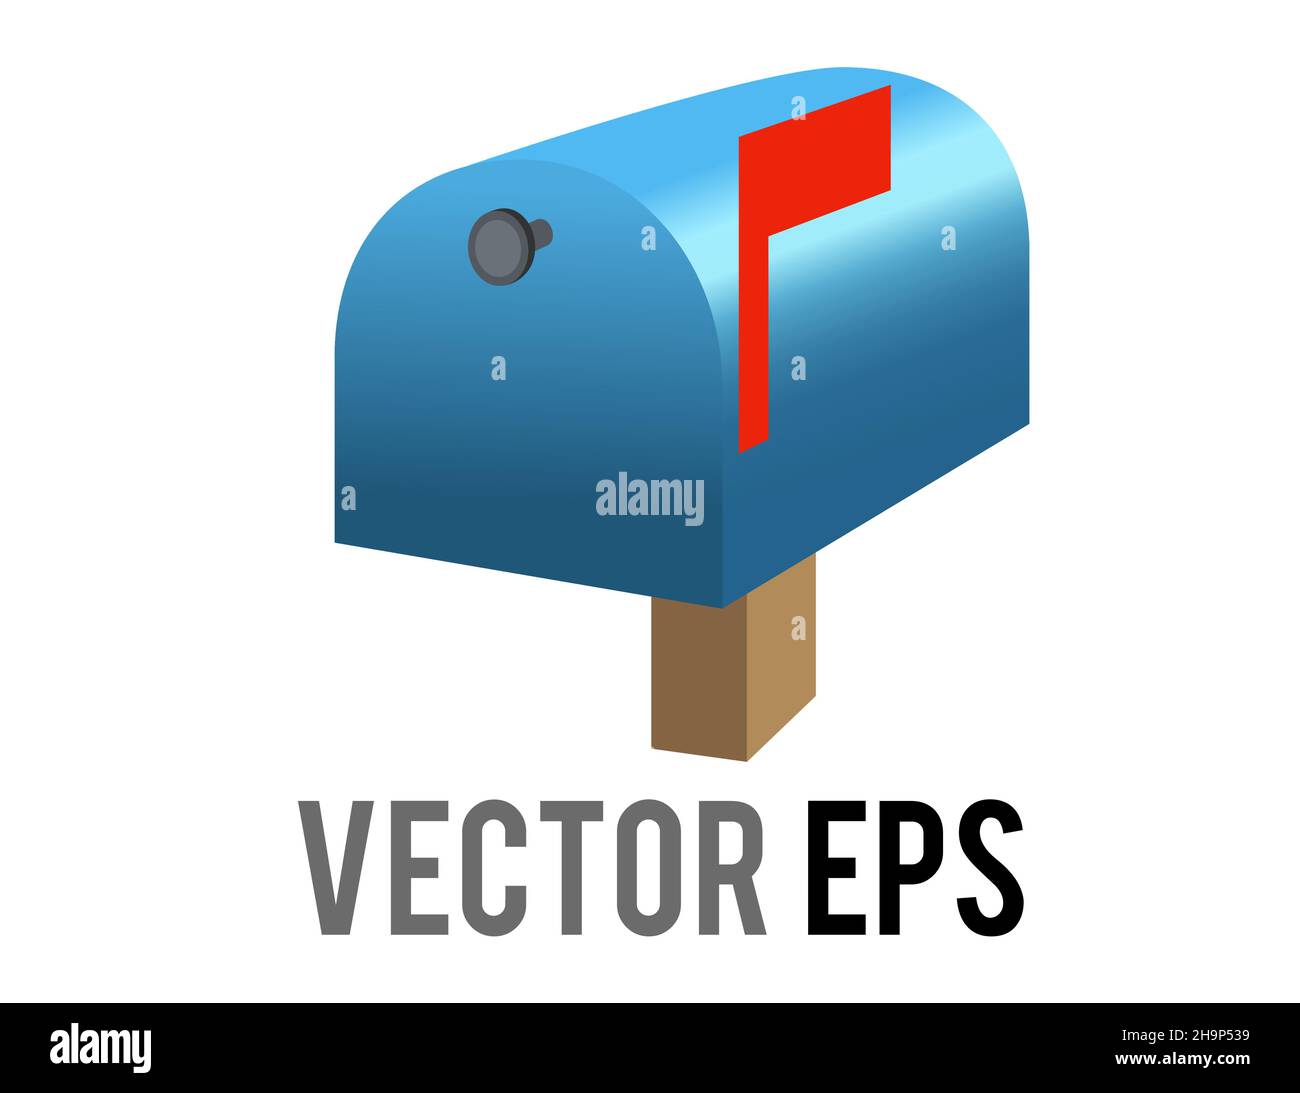 The isolated vector blue close mailbox, letterbox, postbox icon with red raised flag depicted in blue and white envelope Stock Vector